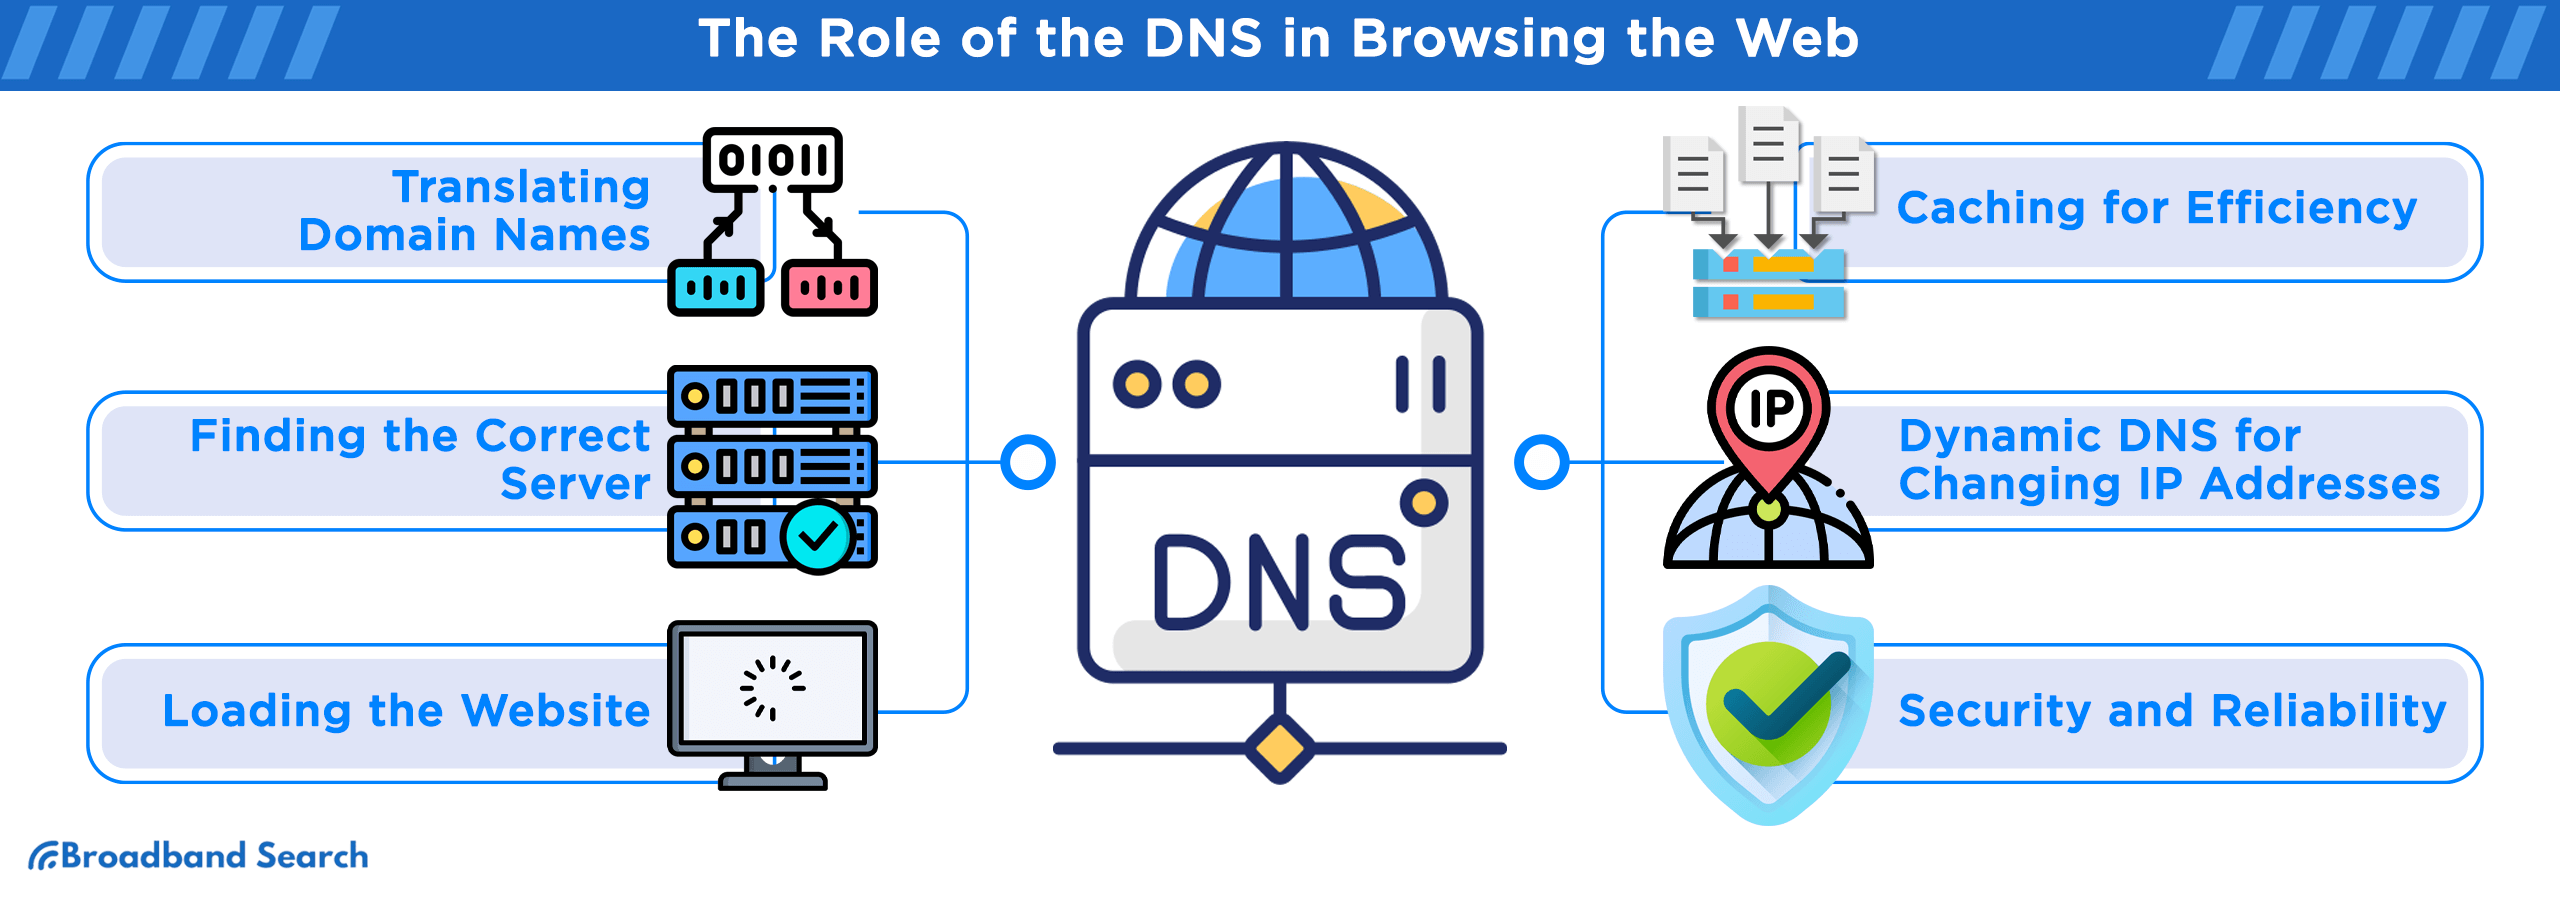 The Role of the DNS in browsing the web